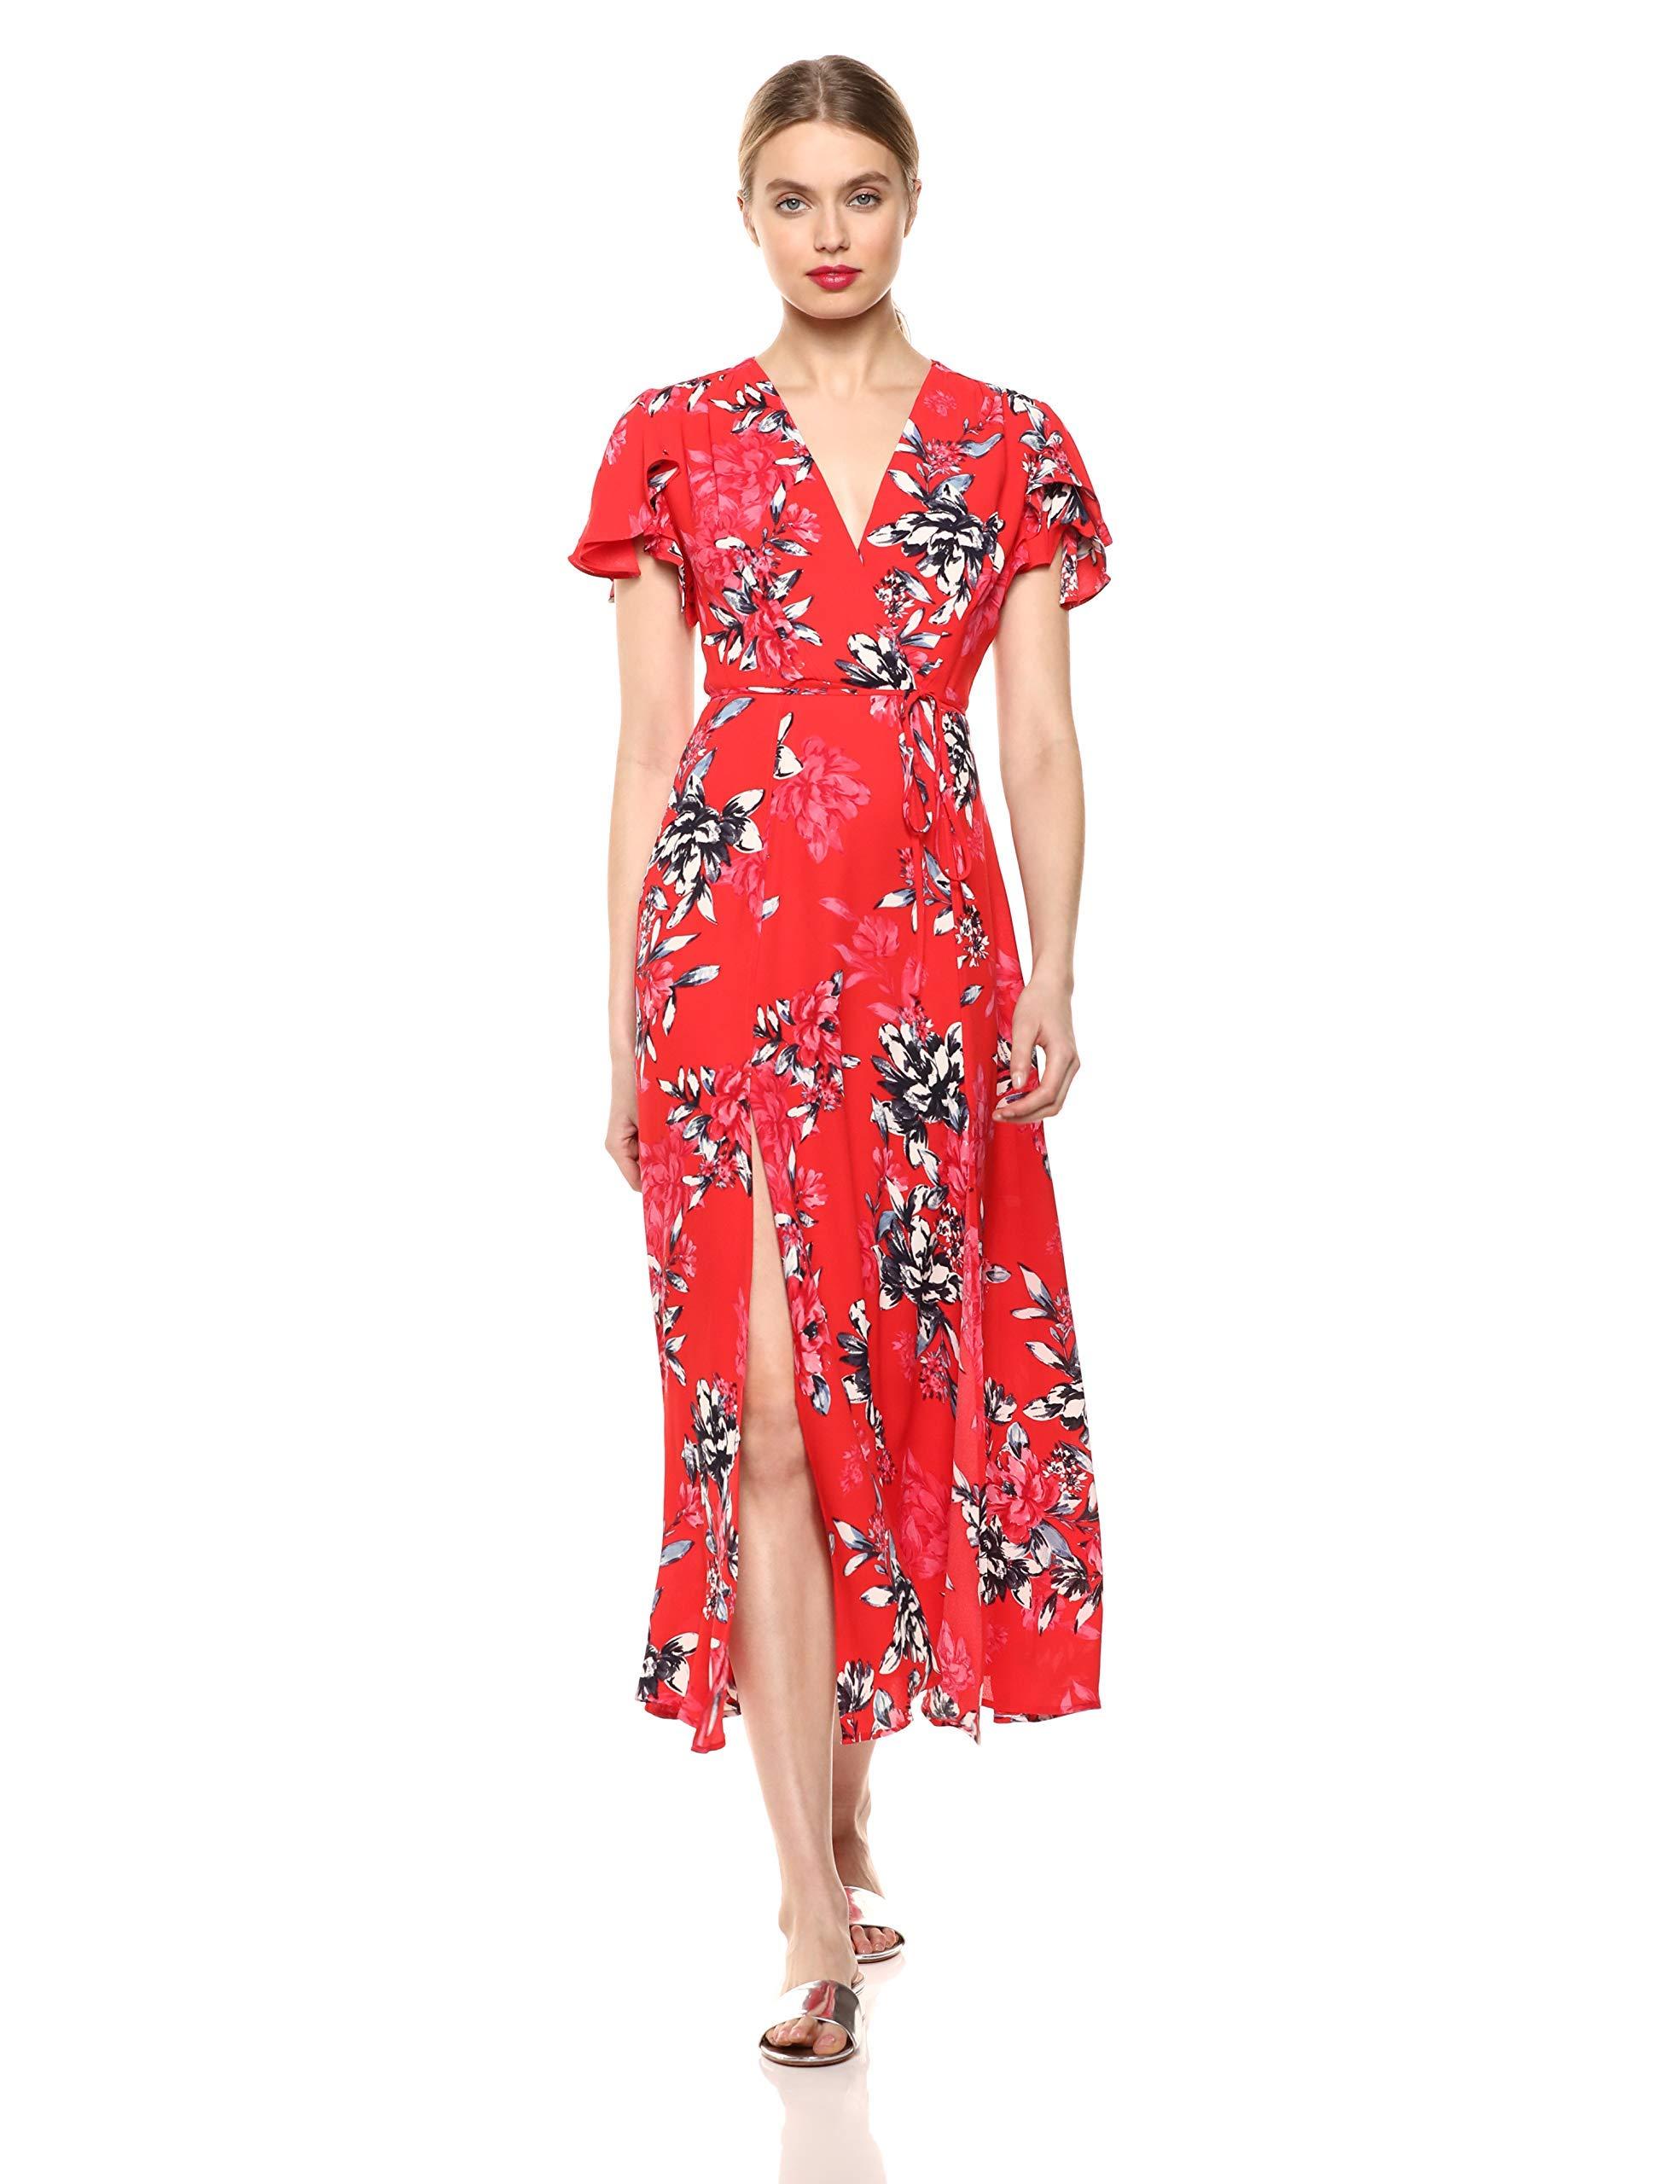 French Connection Classic Crepe Light Woven Dress in Red - Save 48% - Lyst